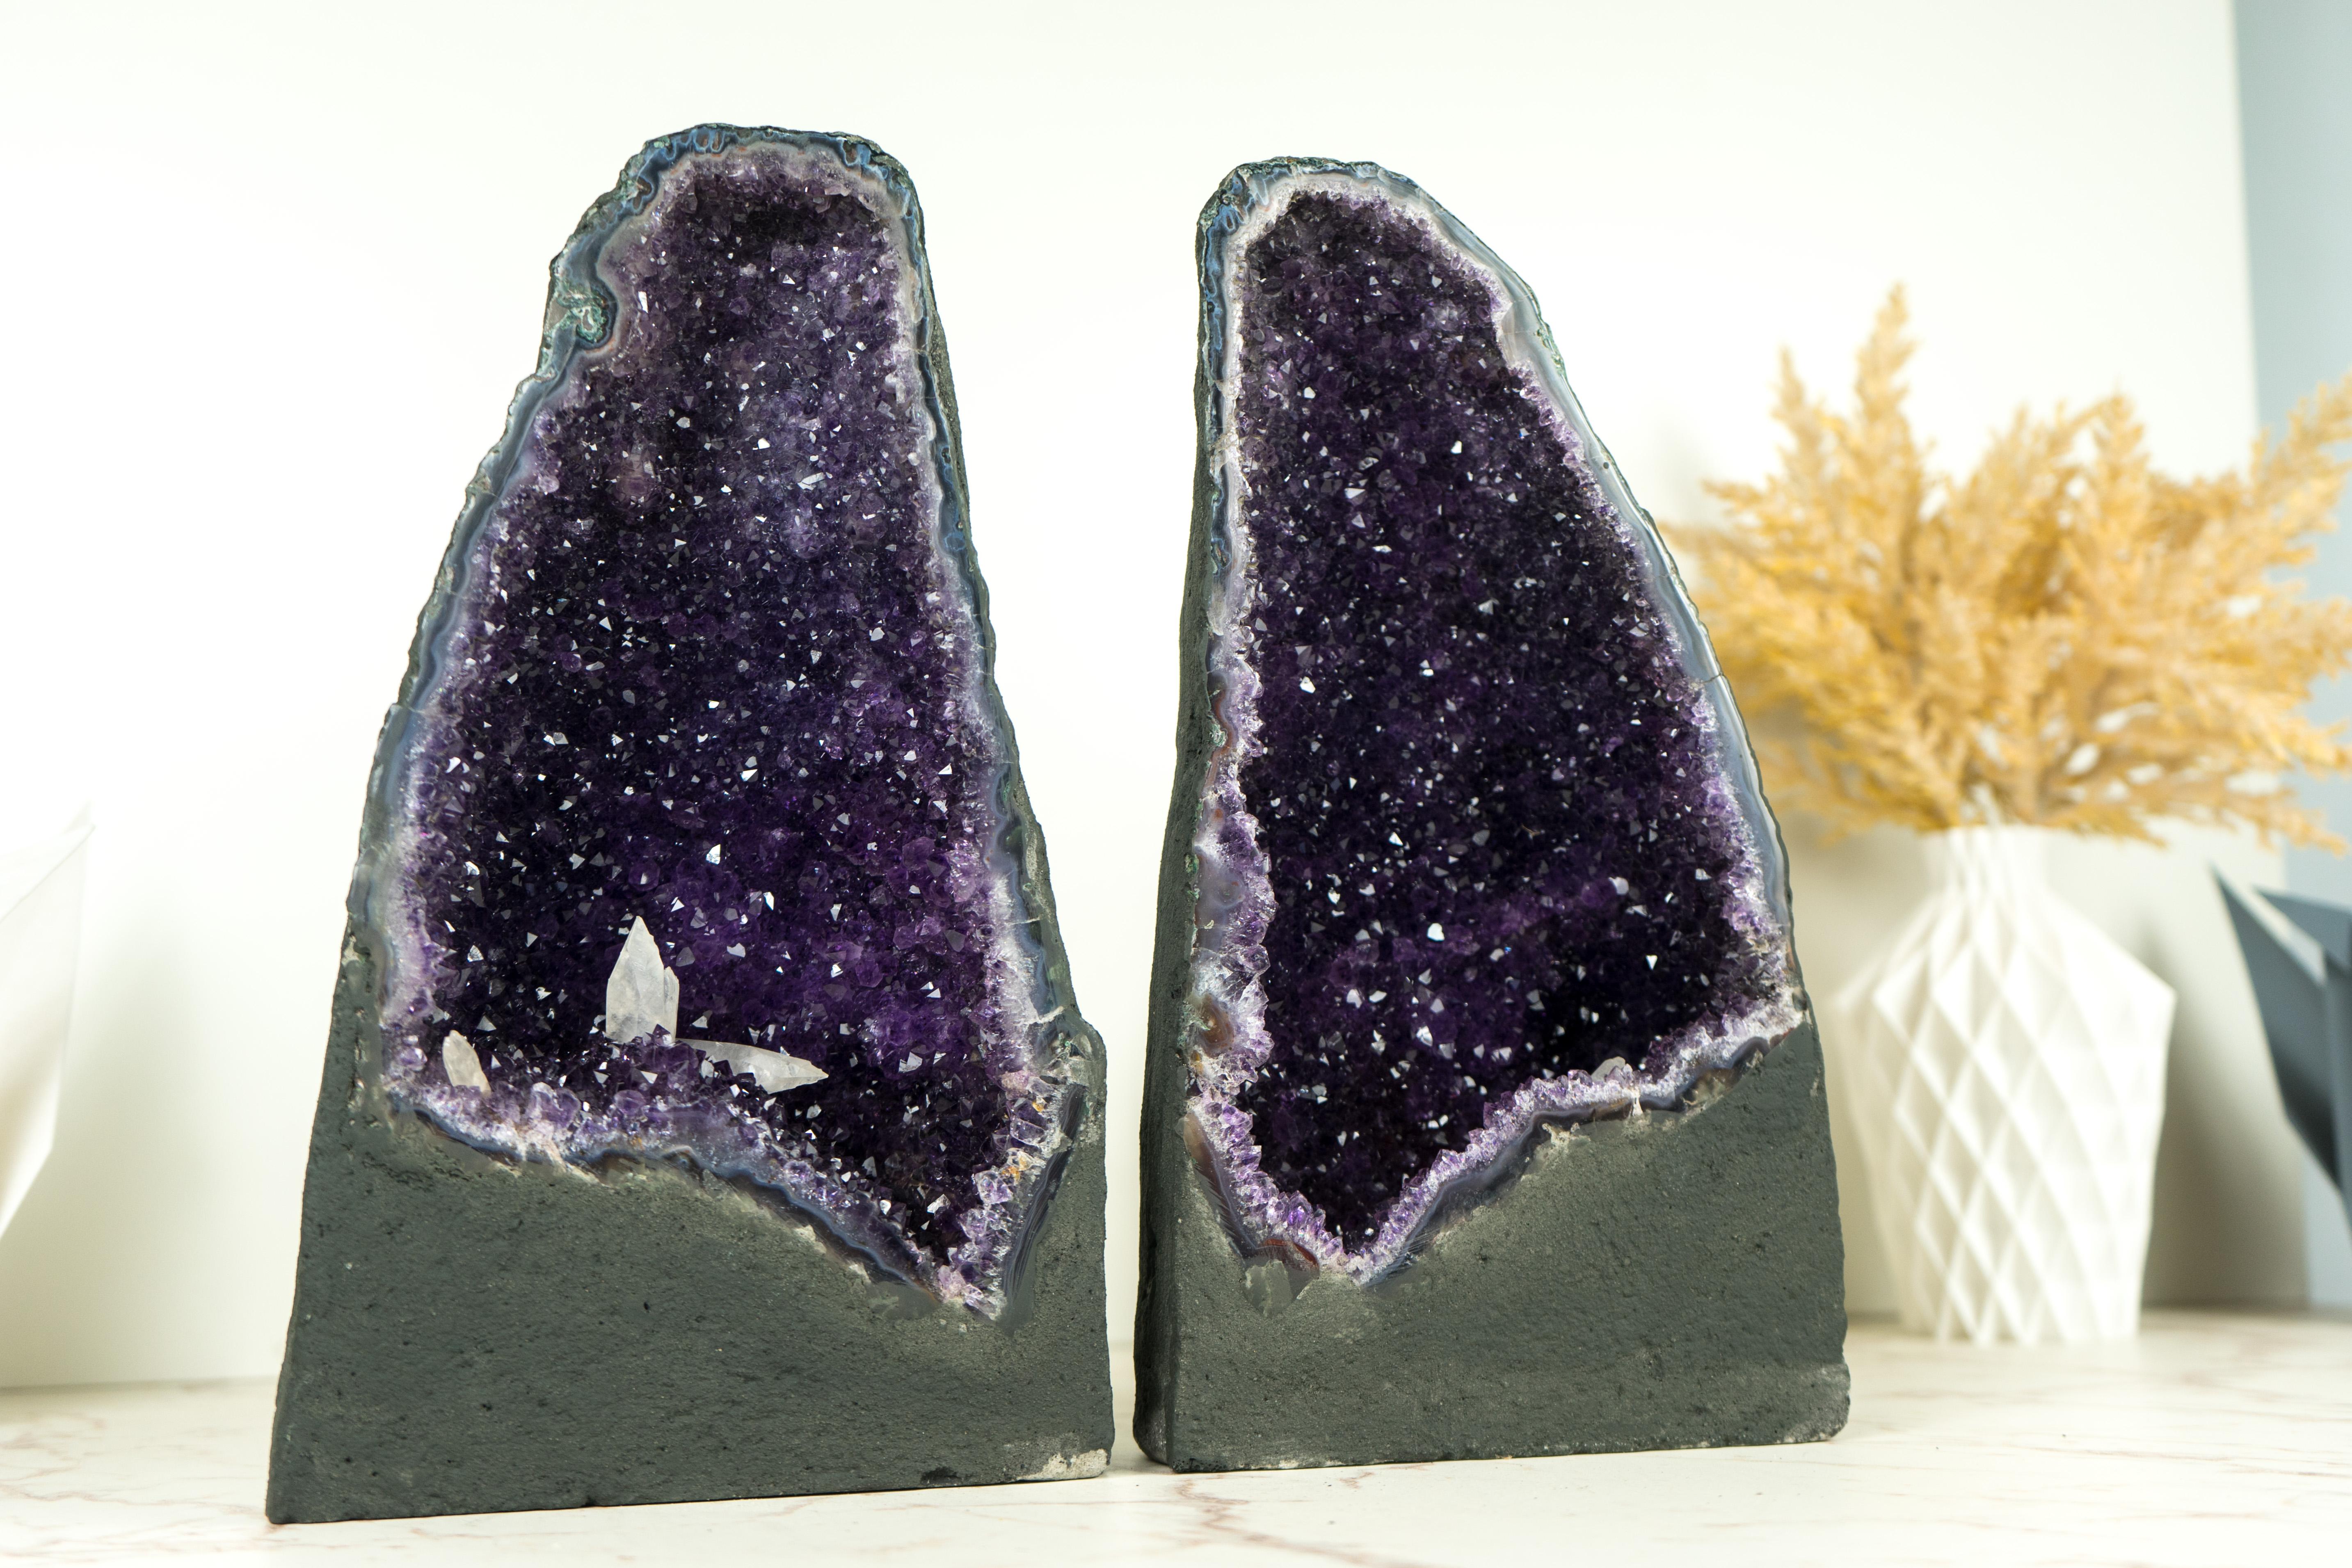 Brazilian All-Natural Amethyst Geodes with Intact Calcite and Rich Purple Galaxy Amethyst 